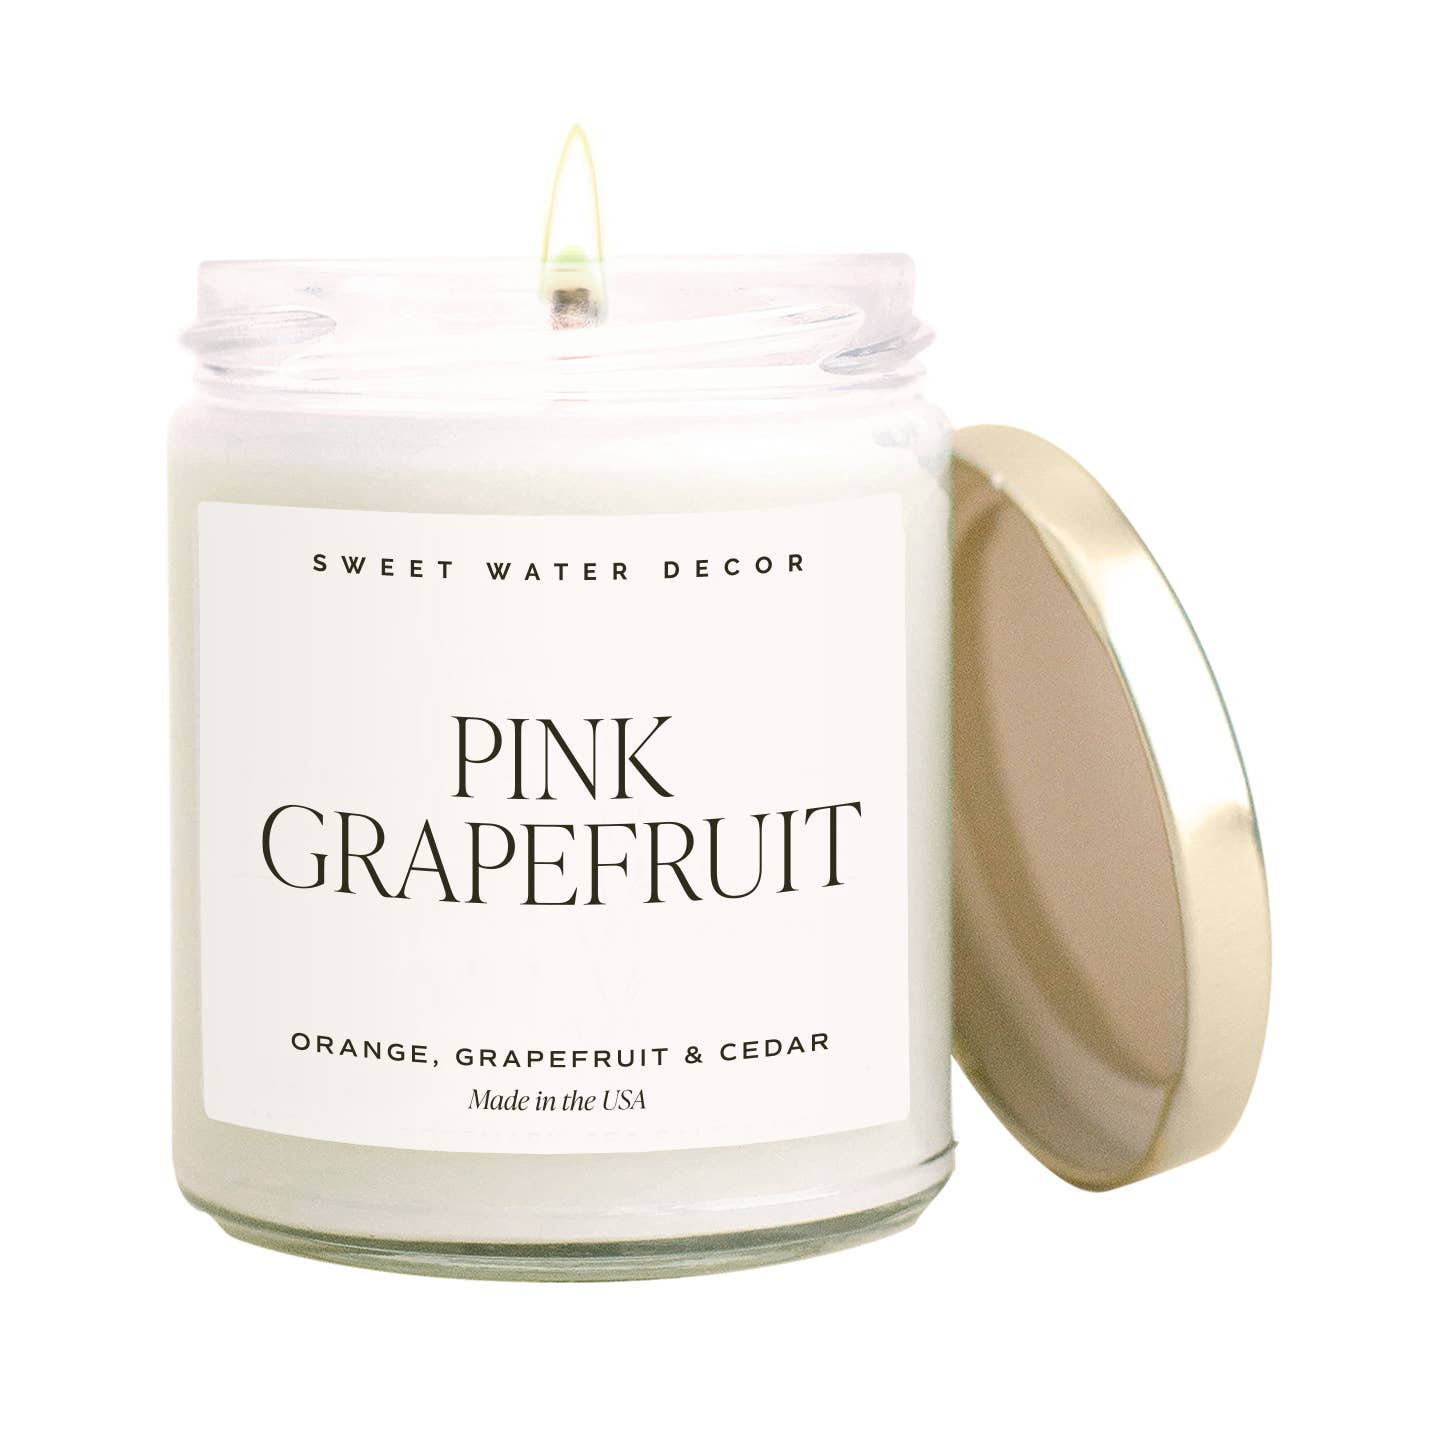 Sweet Water Decor - Pink Grapefruit - 9 oz. Soy Candle